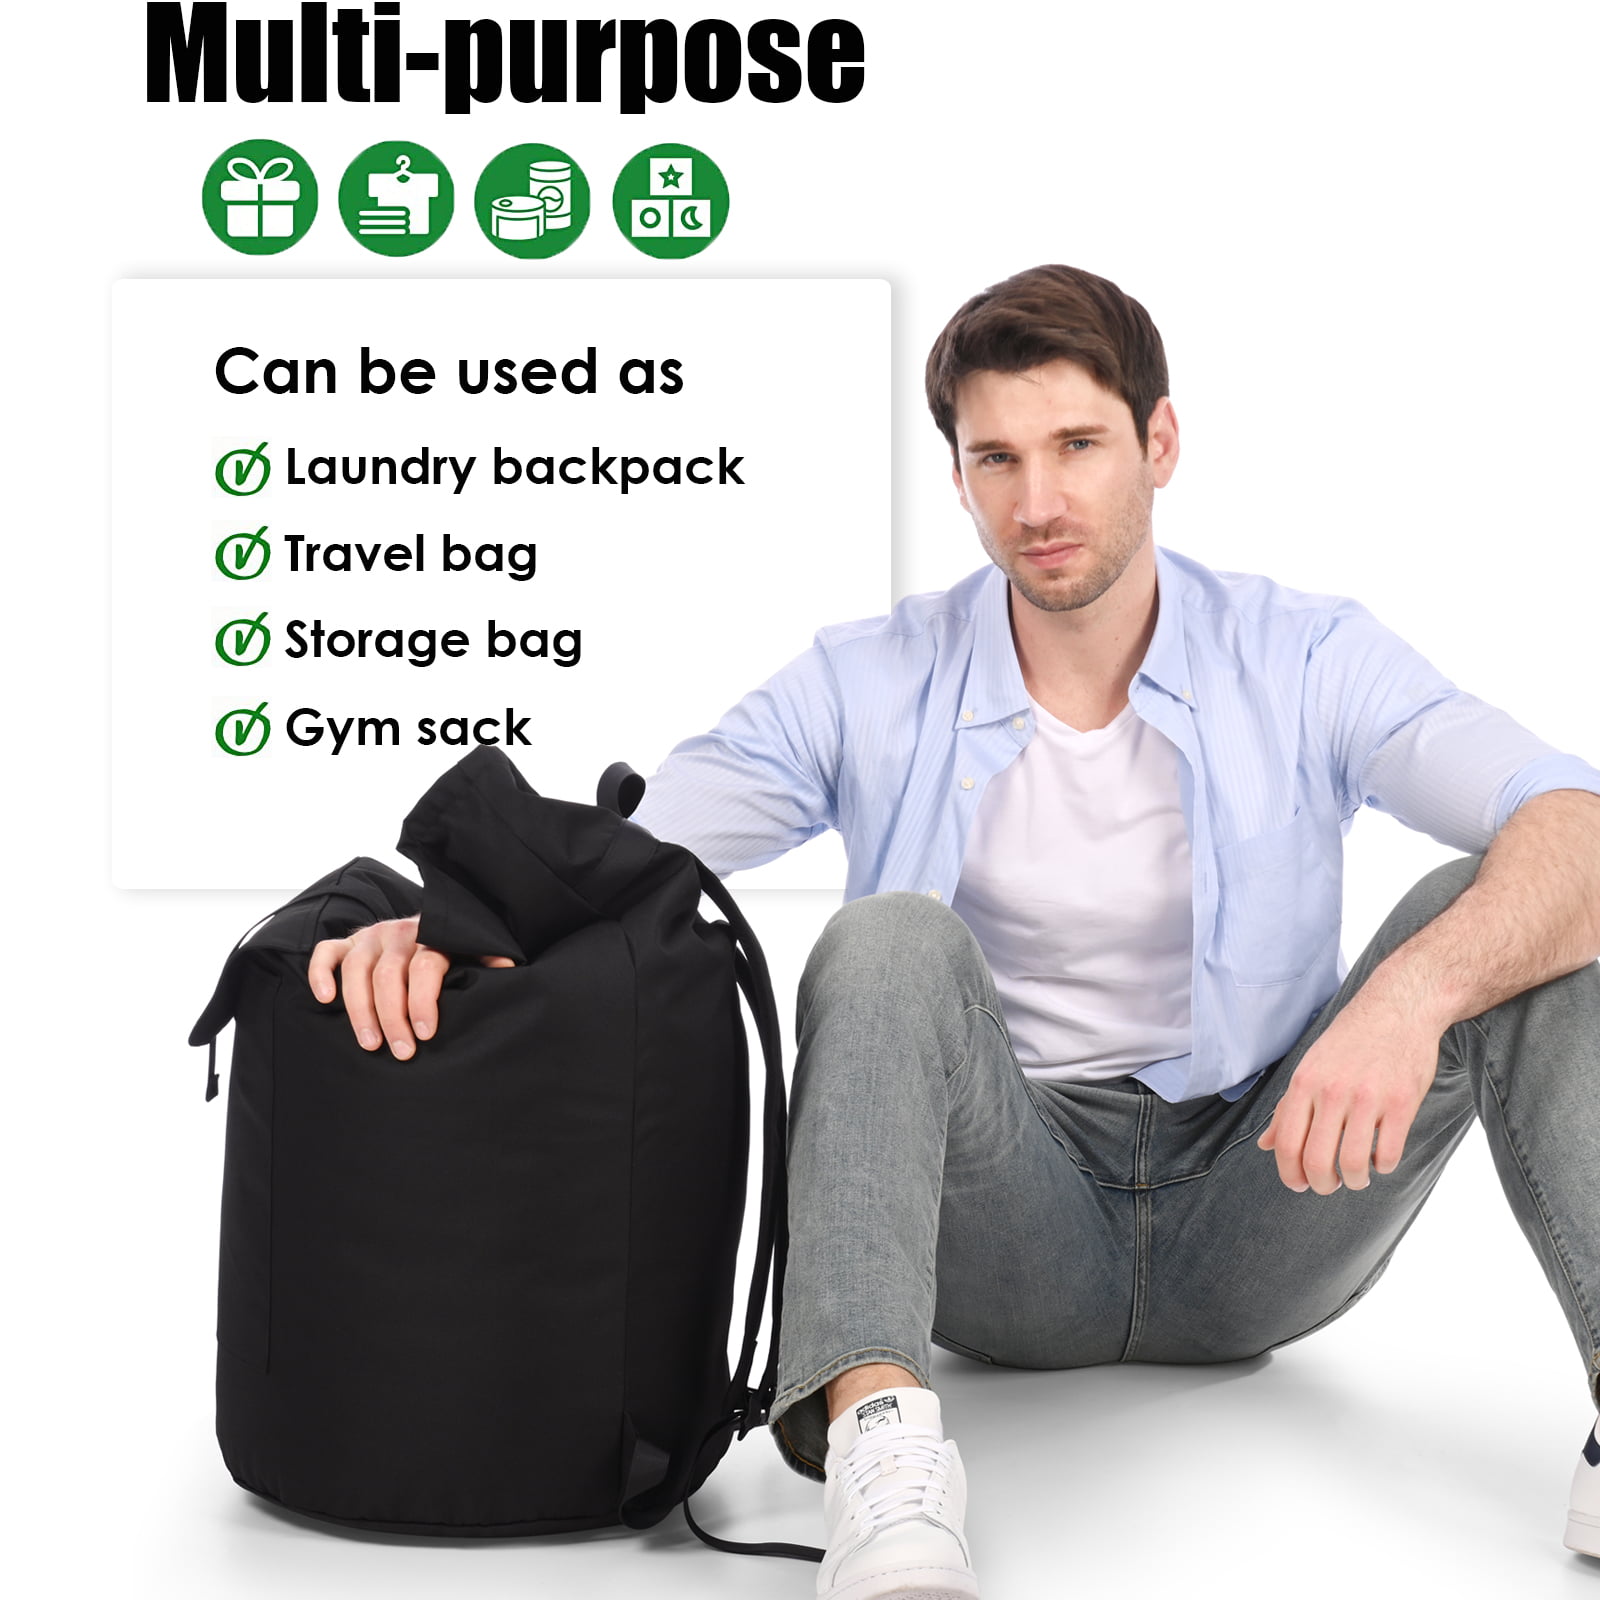 Dalykate Backpack Laundry Bag, Laundry Backpack with Shoulder Straps and  Mesh Pocket Durable Nylon L…See more Dalykate Backpack Laundry Bag, Laundry